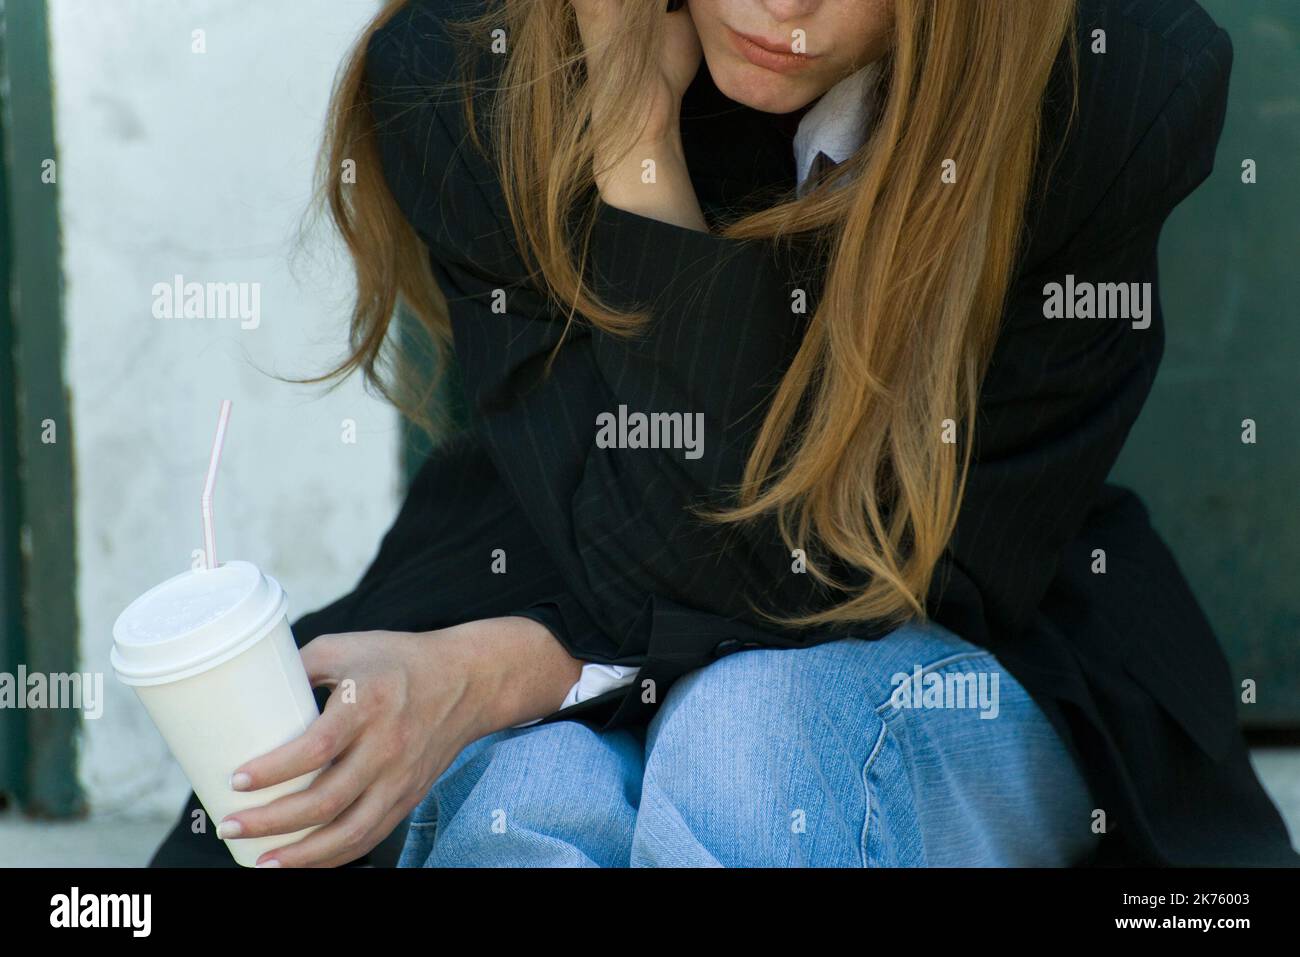 A young woman leaning on her elbow holding a cup with a plastic straw. Stock Photo